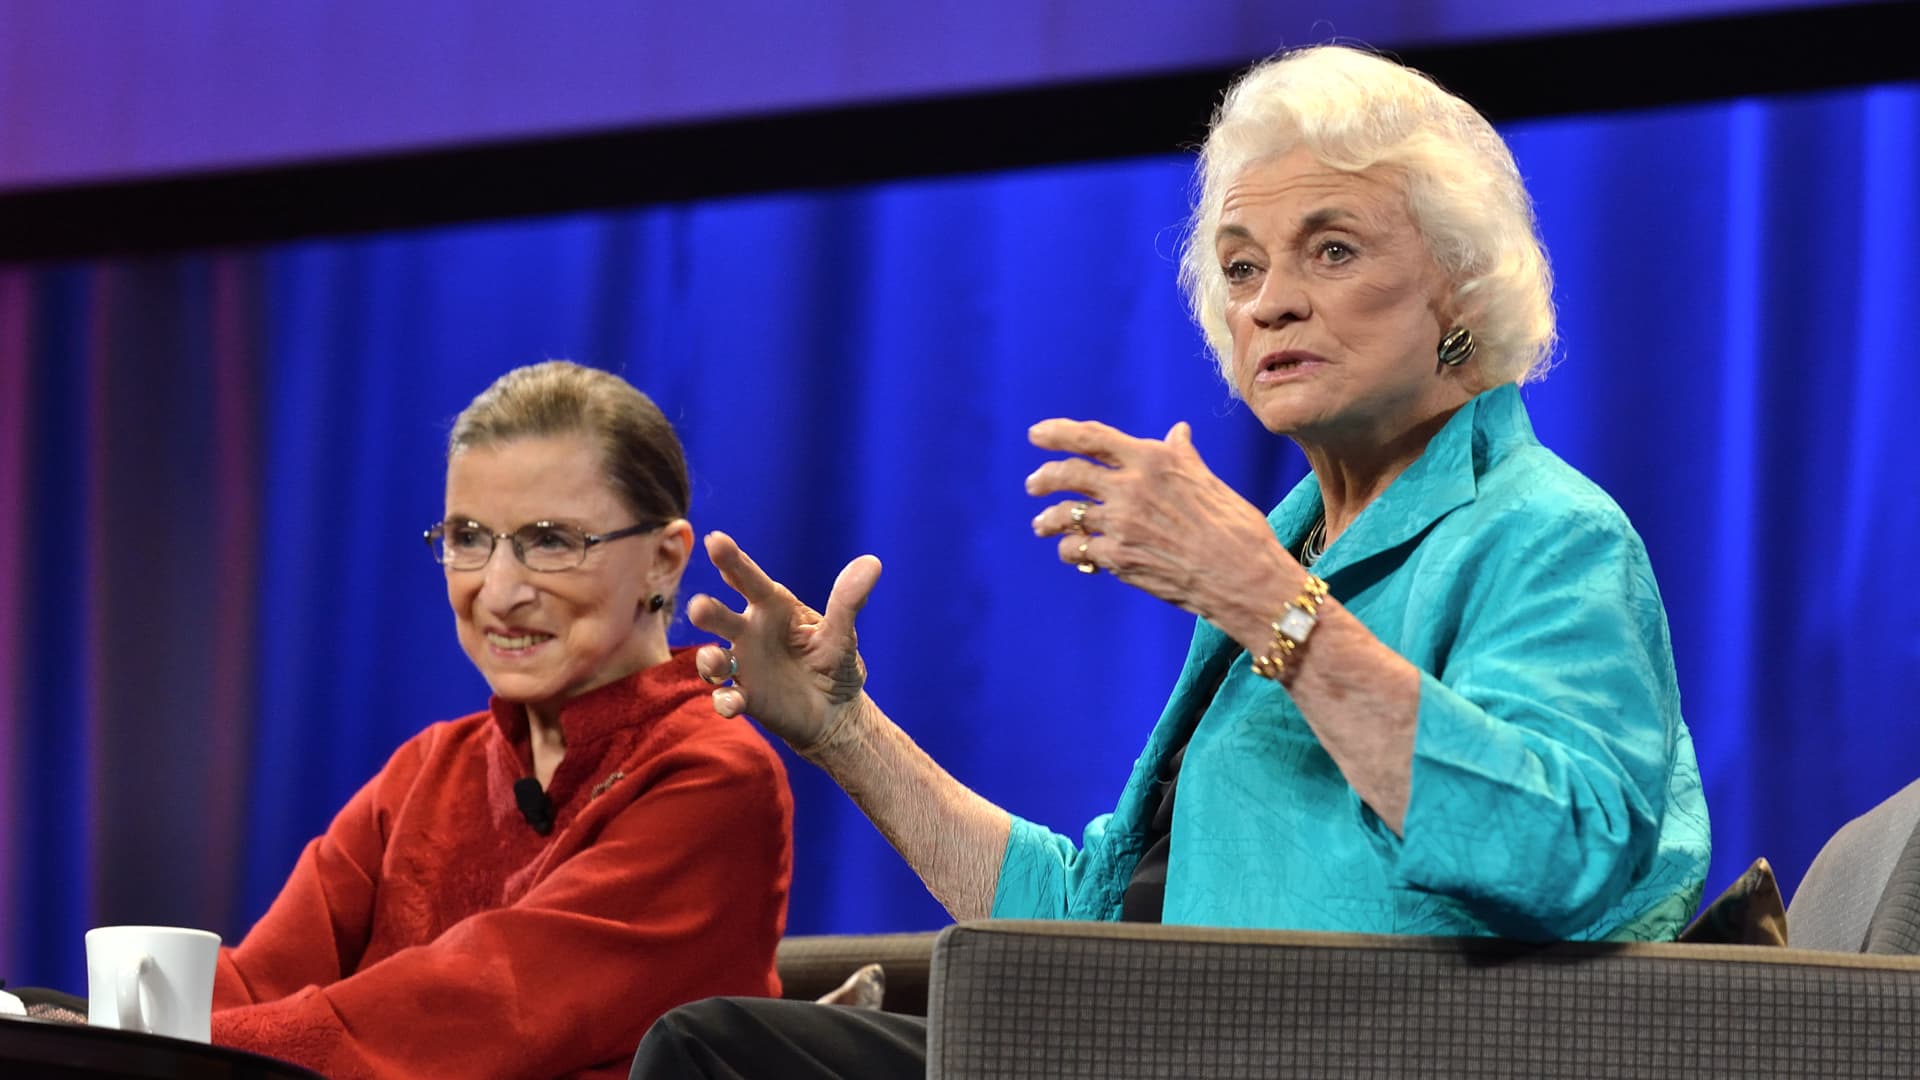 Diane Sawyer leads a discussion with U.S. Supreme Court justice Ruth Badar Ginsburg, left, and retired justice Sandra Day O'Connor, during the Women's Conference in Long Beach, CA on October 26, 2010.